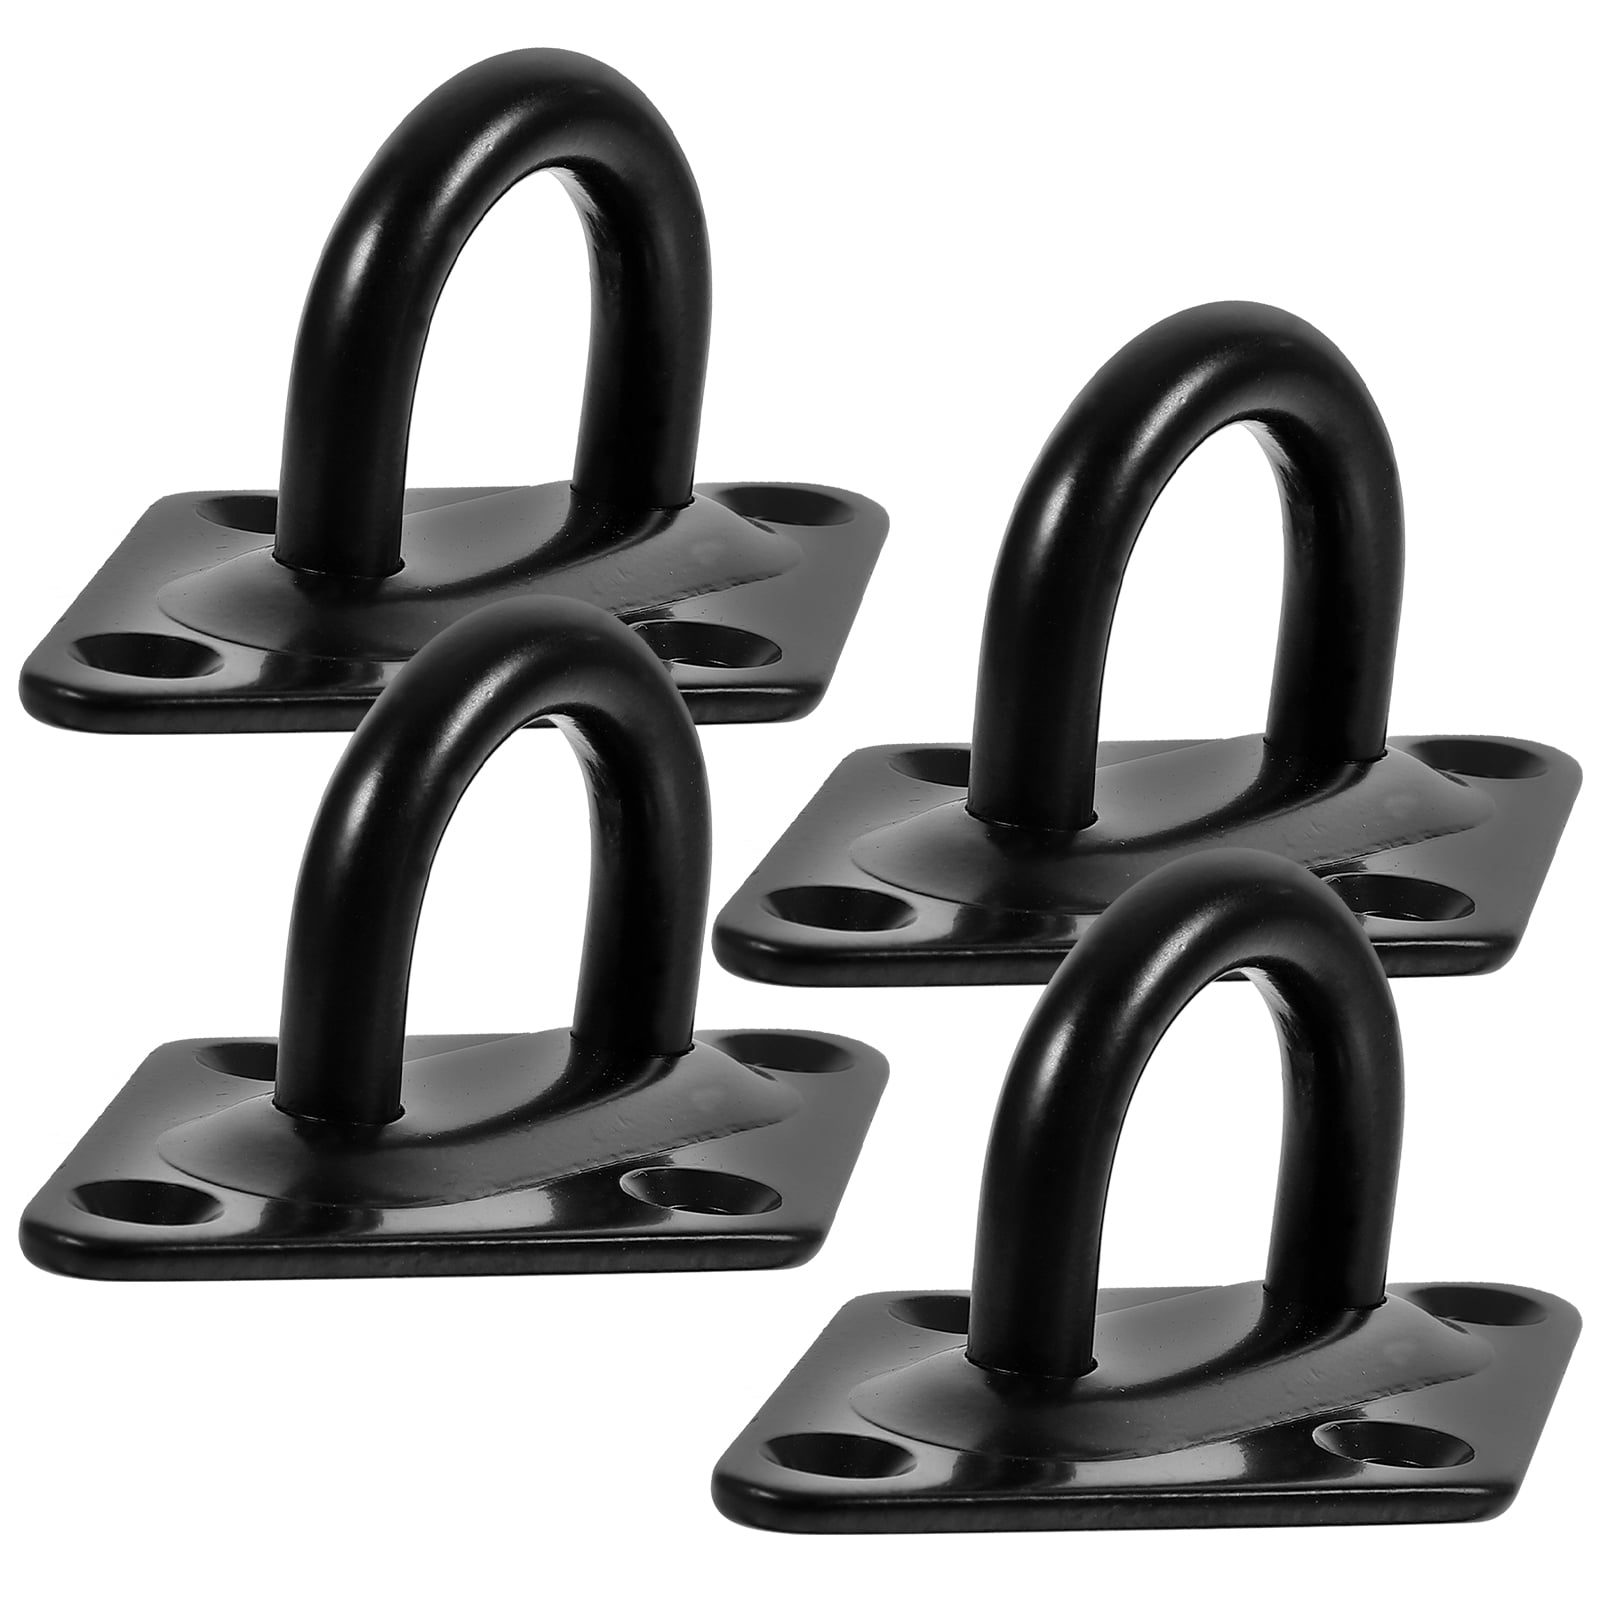 4 Pcs Roof Wall Hook Hooks for Hanging Heavy Duty Stainless Steel Mounted  Ceiling Lifting Eye Plate Marine Hardware